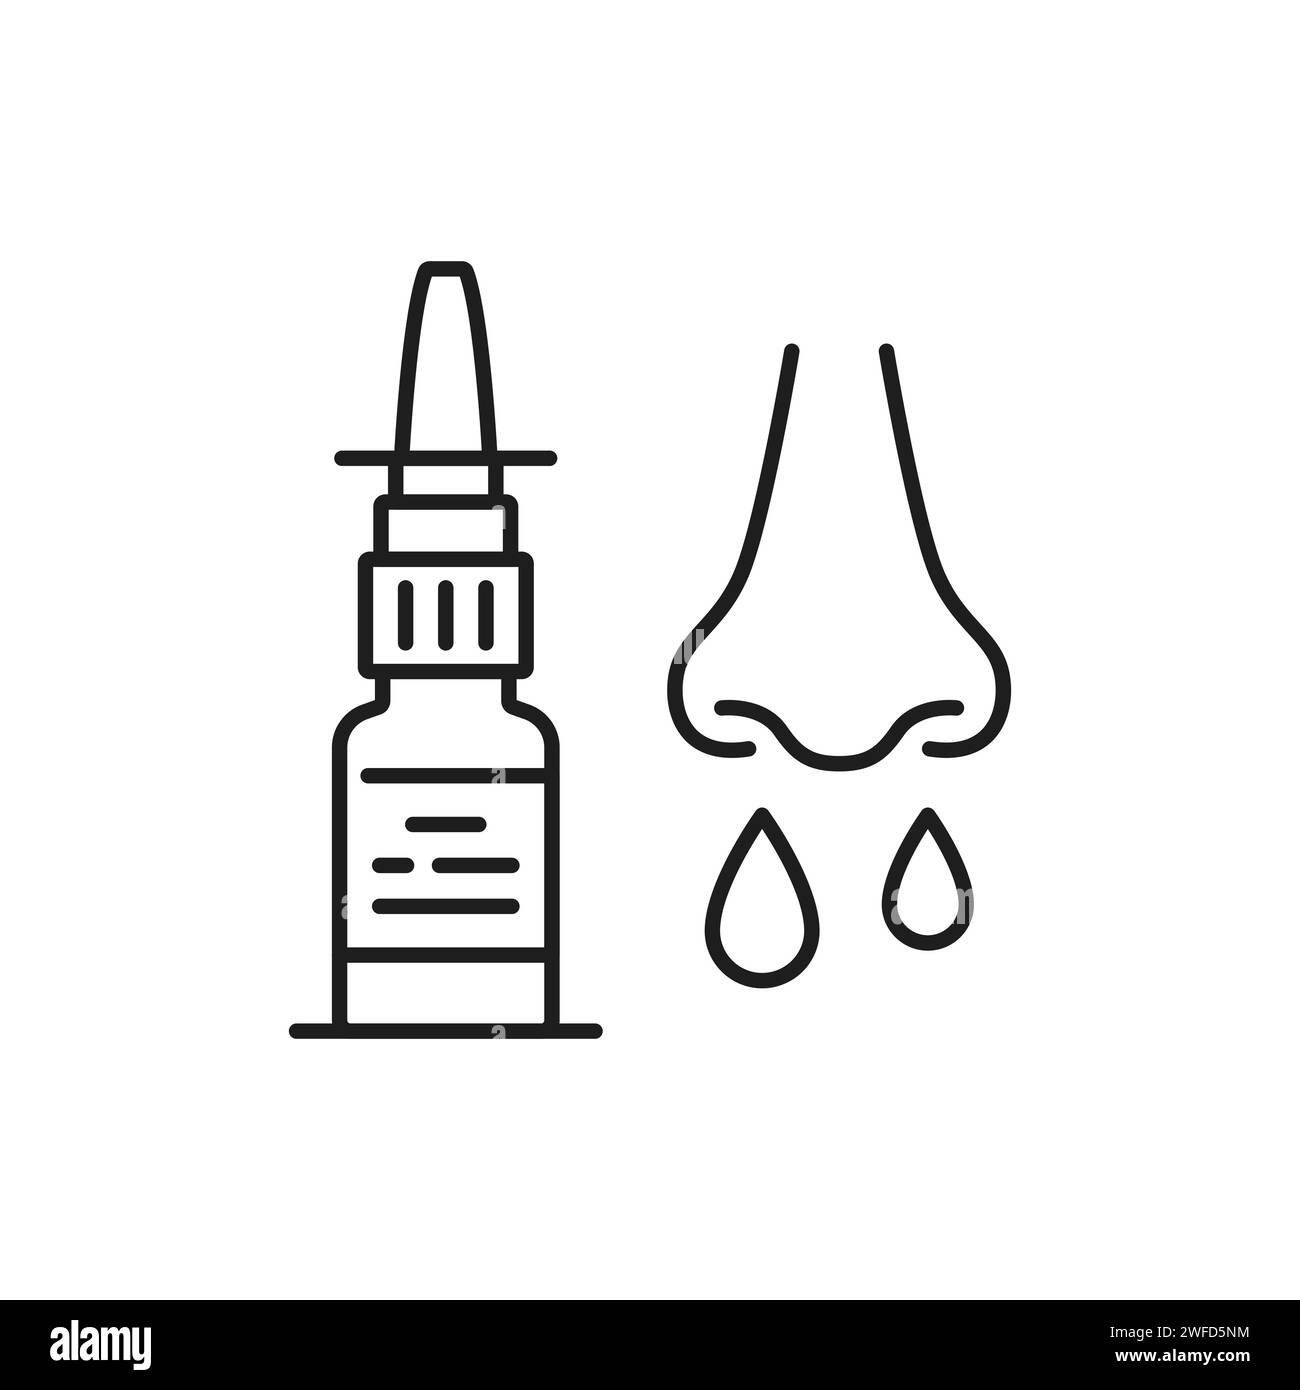 Nasal spray line icon of pharmacy medicine and medical treatment, outline vector. Nasal spray bottle for nasal congestion and allergy rhinitis remedy, outline medical pictogram for healthcare Stock Vector